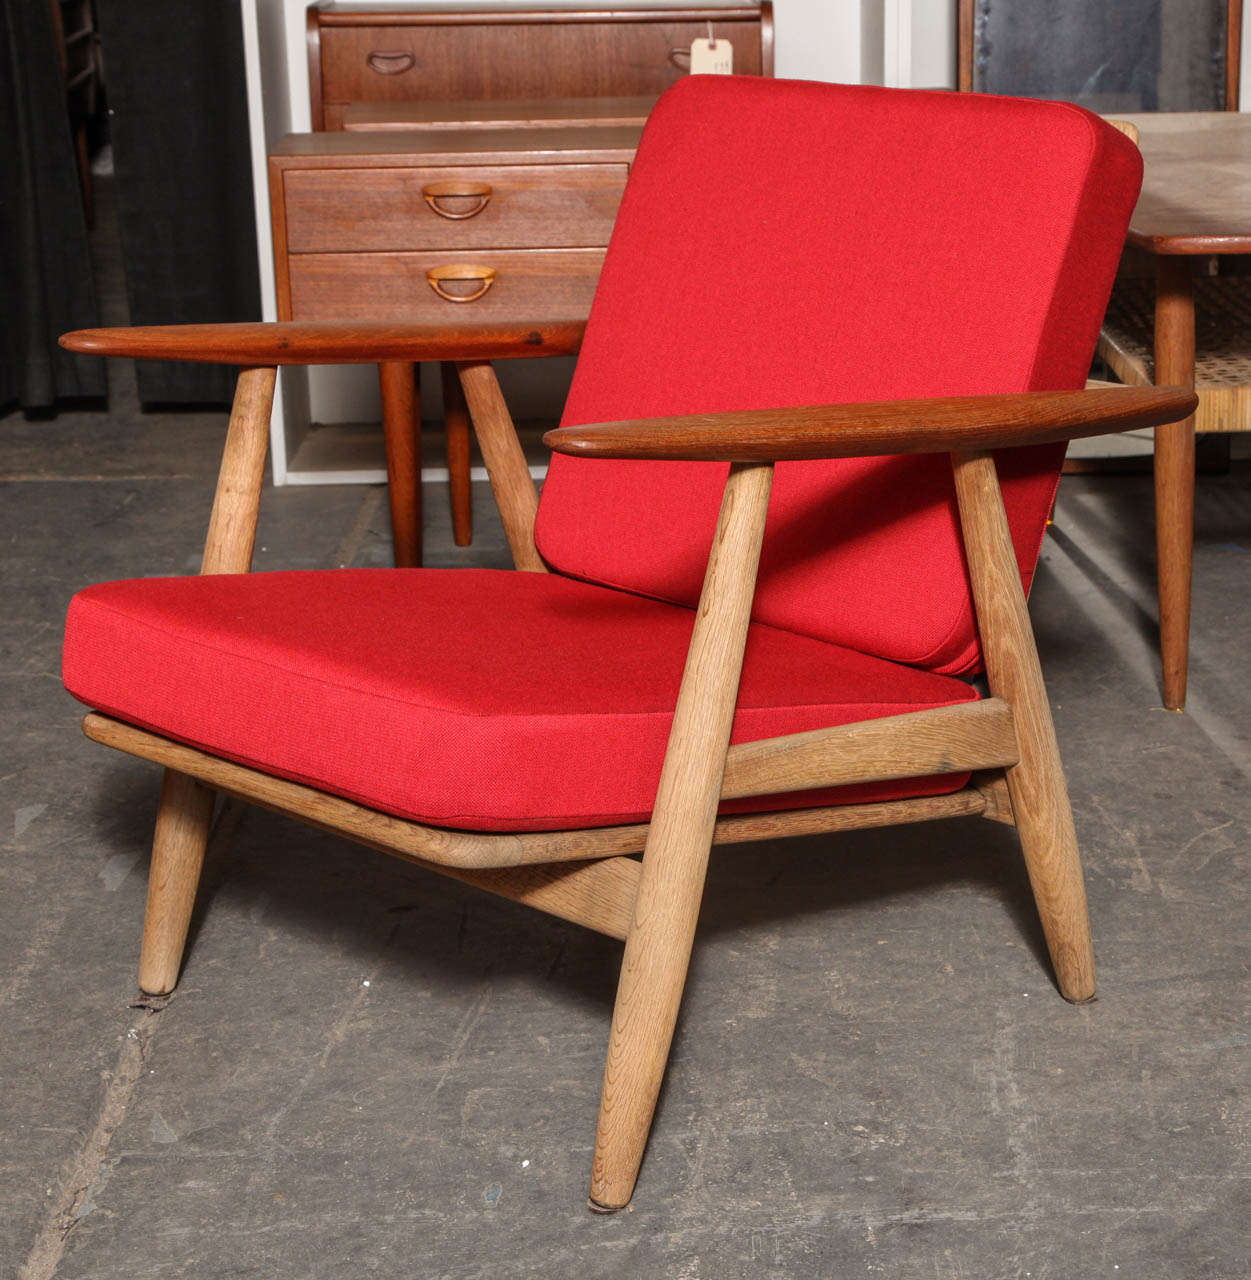 Vintage 1950s Getama Cigar Chair by Hans Wegner.

This Vintage Wegner Chair has it's original spring cushions which are incredibly comfort. Seriously only comparable to a cloud. The Arms are made of teak and base of oak, a very popular combination